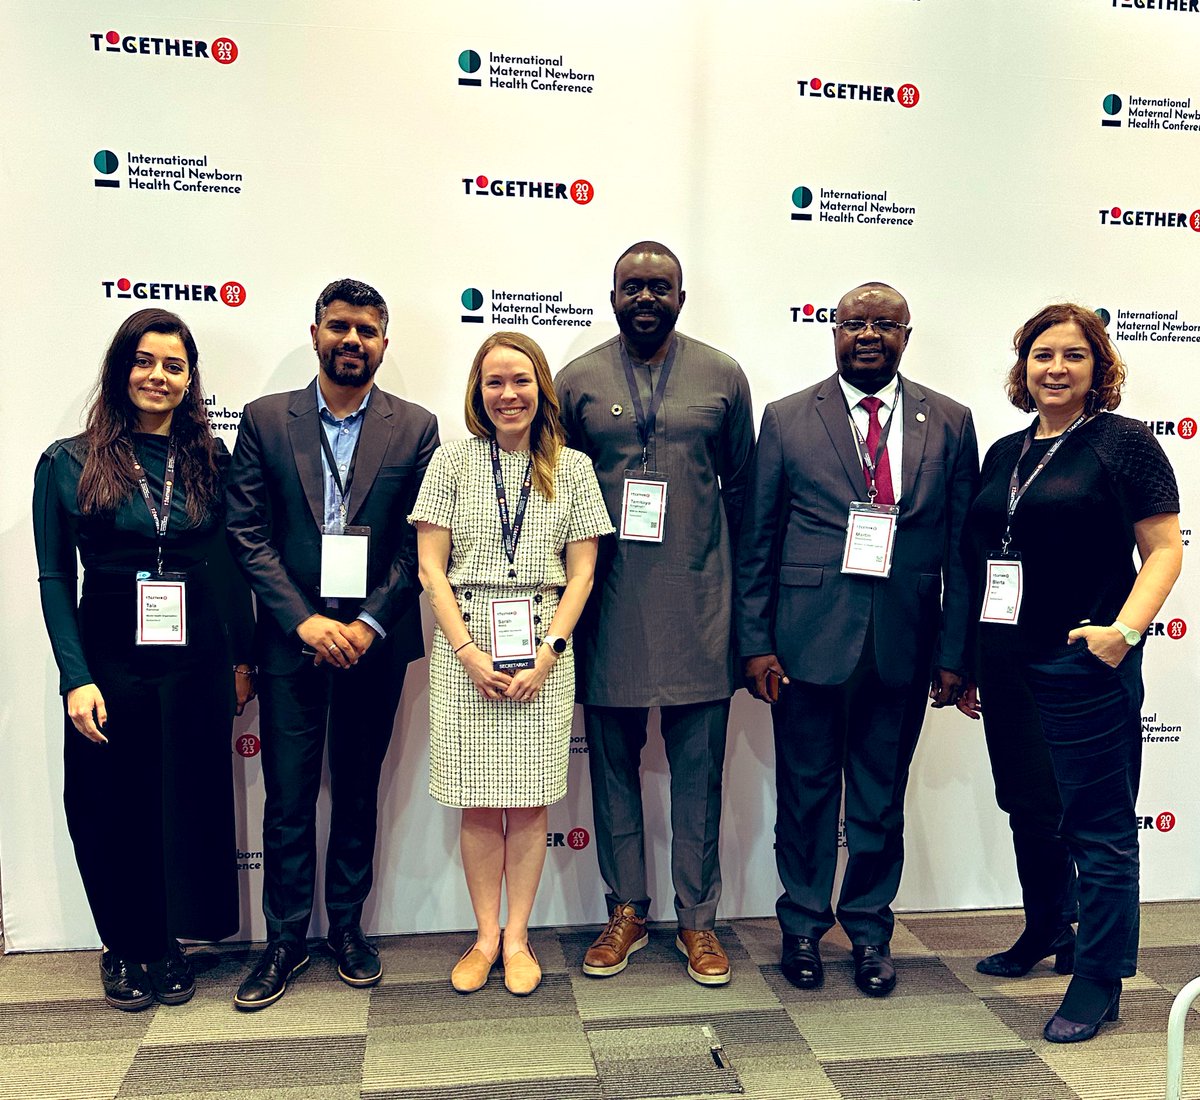 It was an honor to sit on a panel for private sector engagement for #MNH at the #IMNHC2023 with Blerta & Tala from @WHO, @TemitayoE from @MSDforMothers, Martin from the UG MOH, and @rajatchabba and I representing @Jhpiego. The priv sector can fuel #MNHInnovation & extend access.